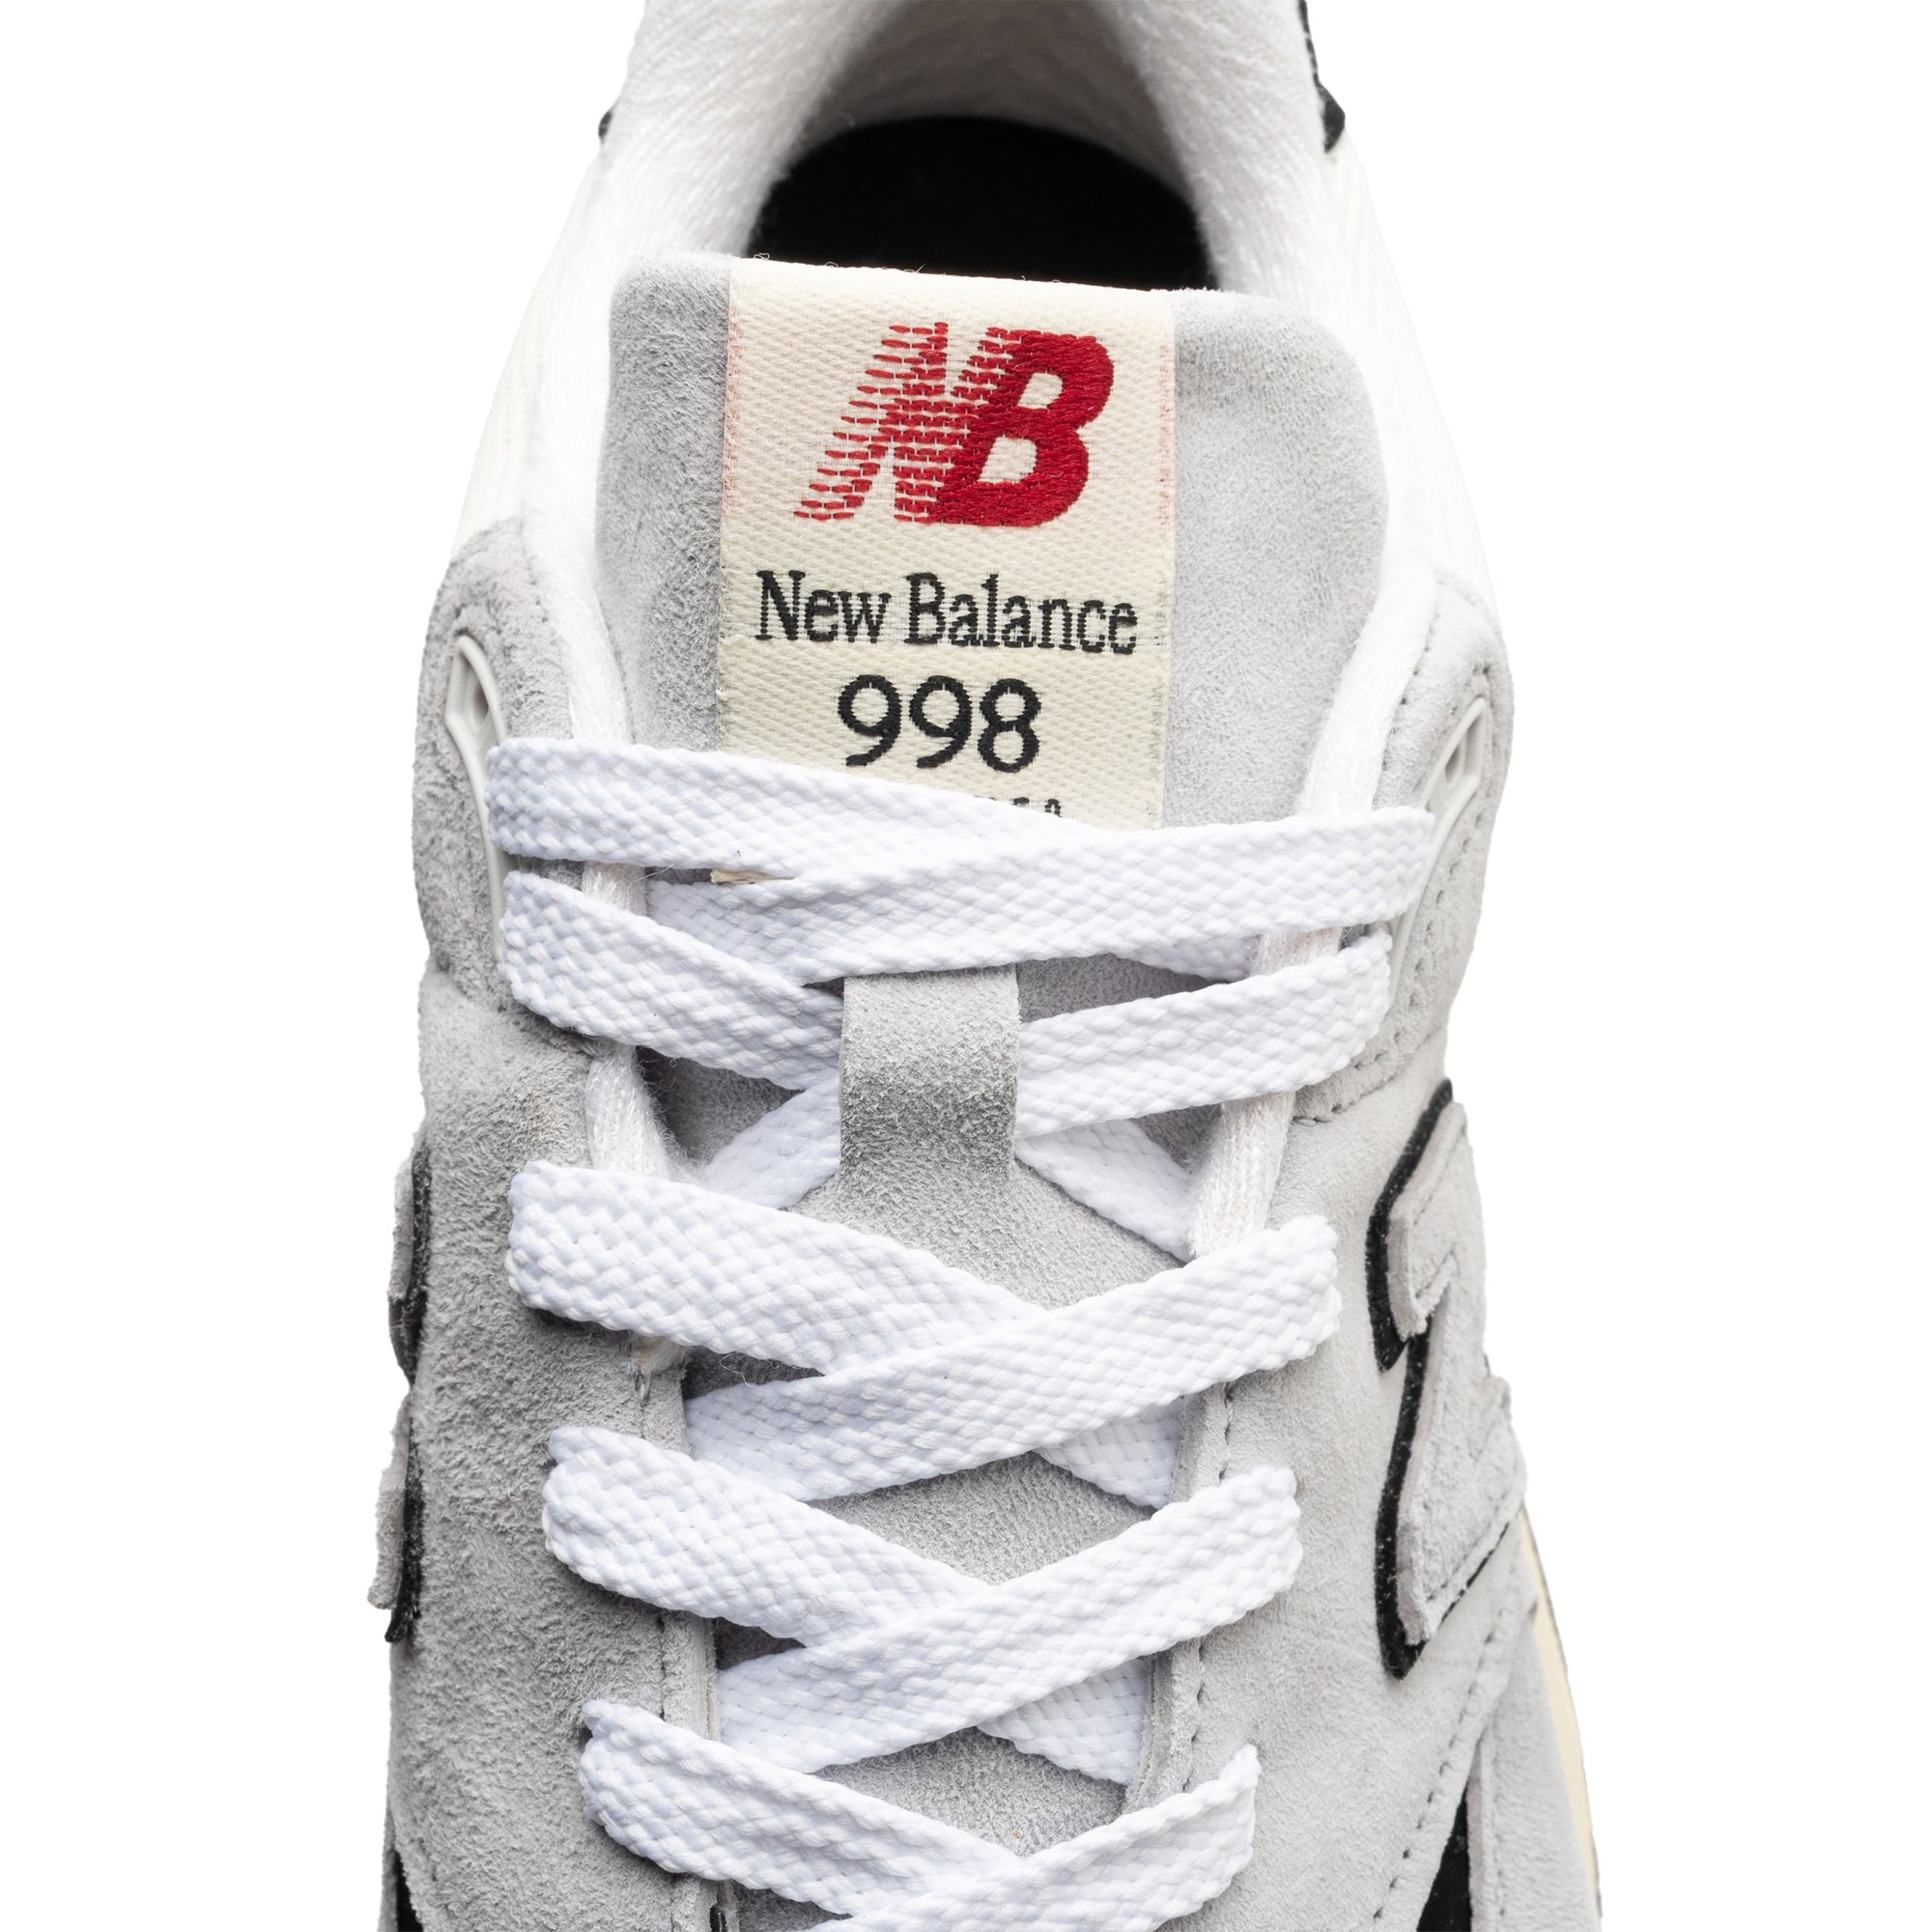 New Balance Taps Bryant Giles For His Creative Take On The New Balance 2002R